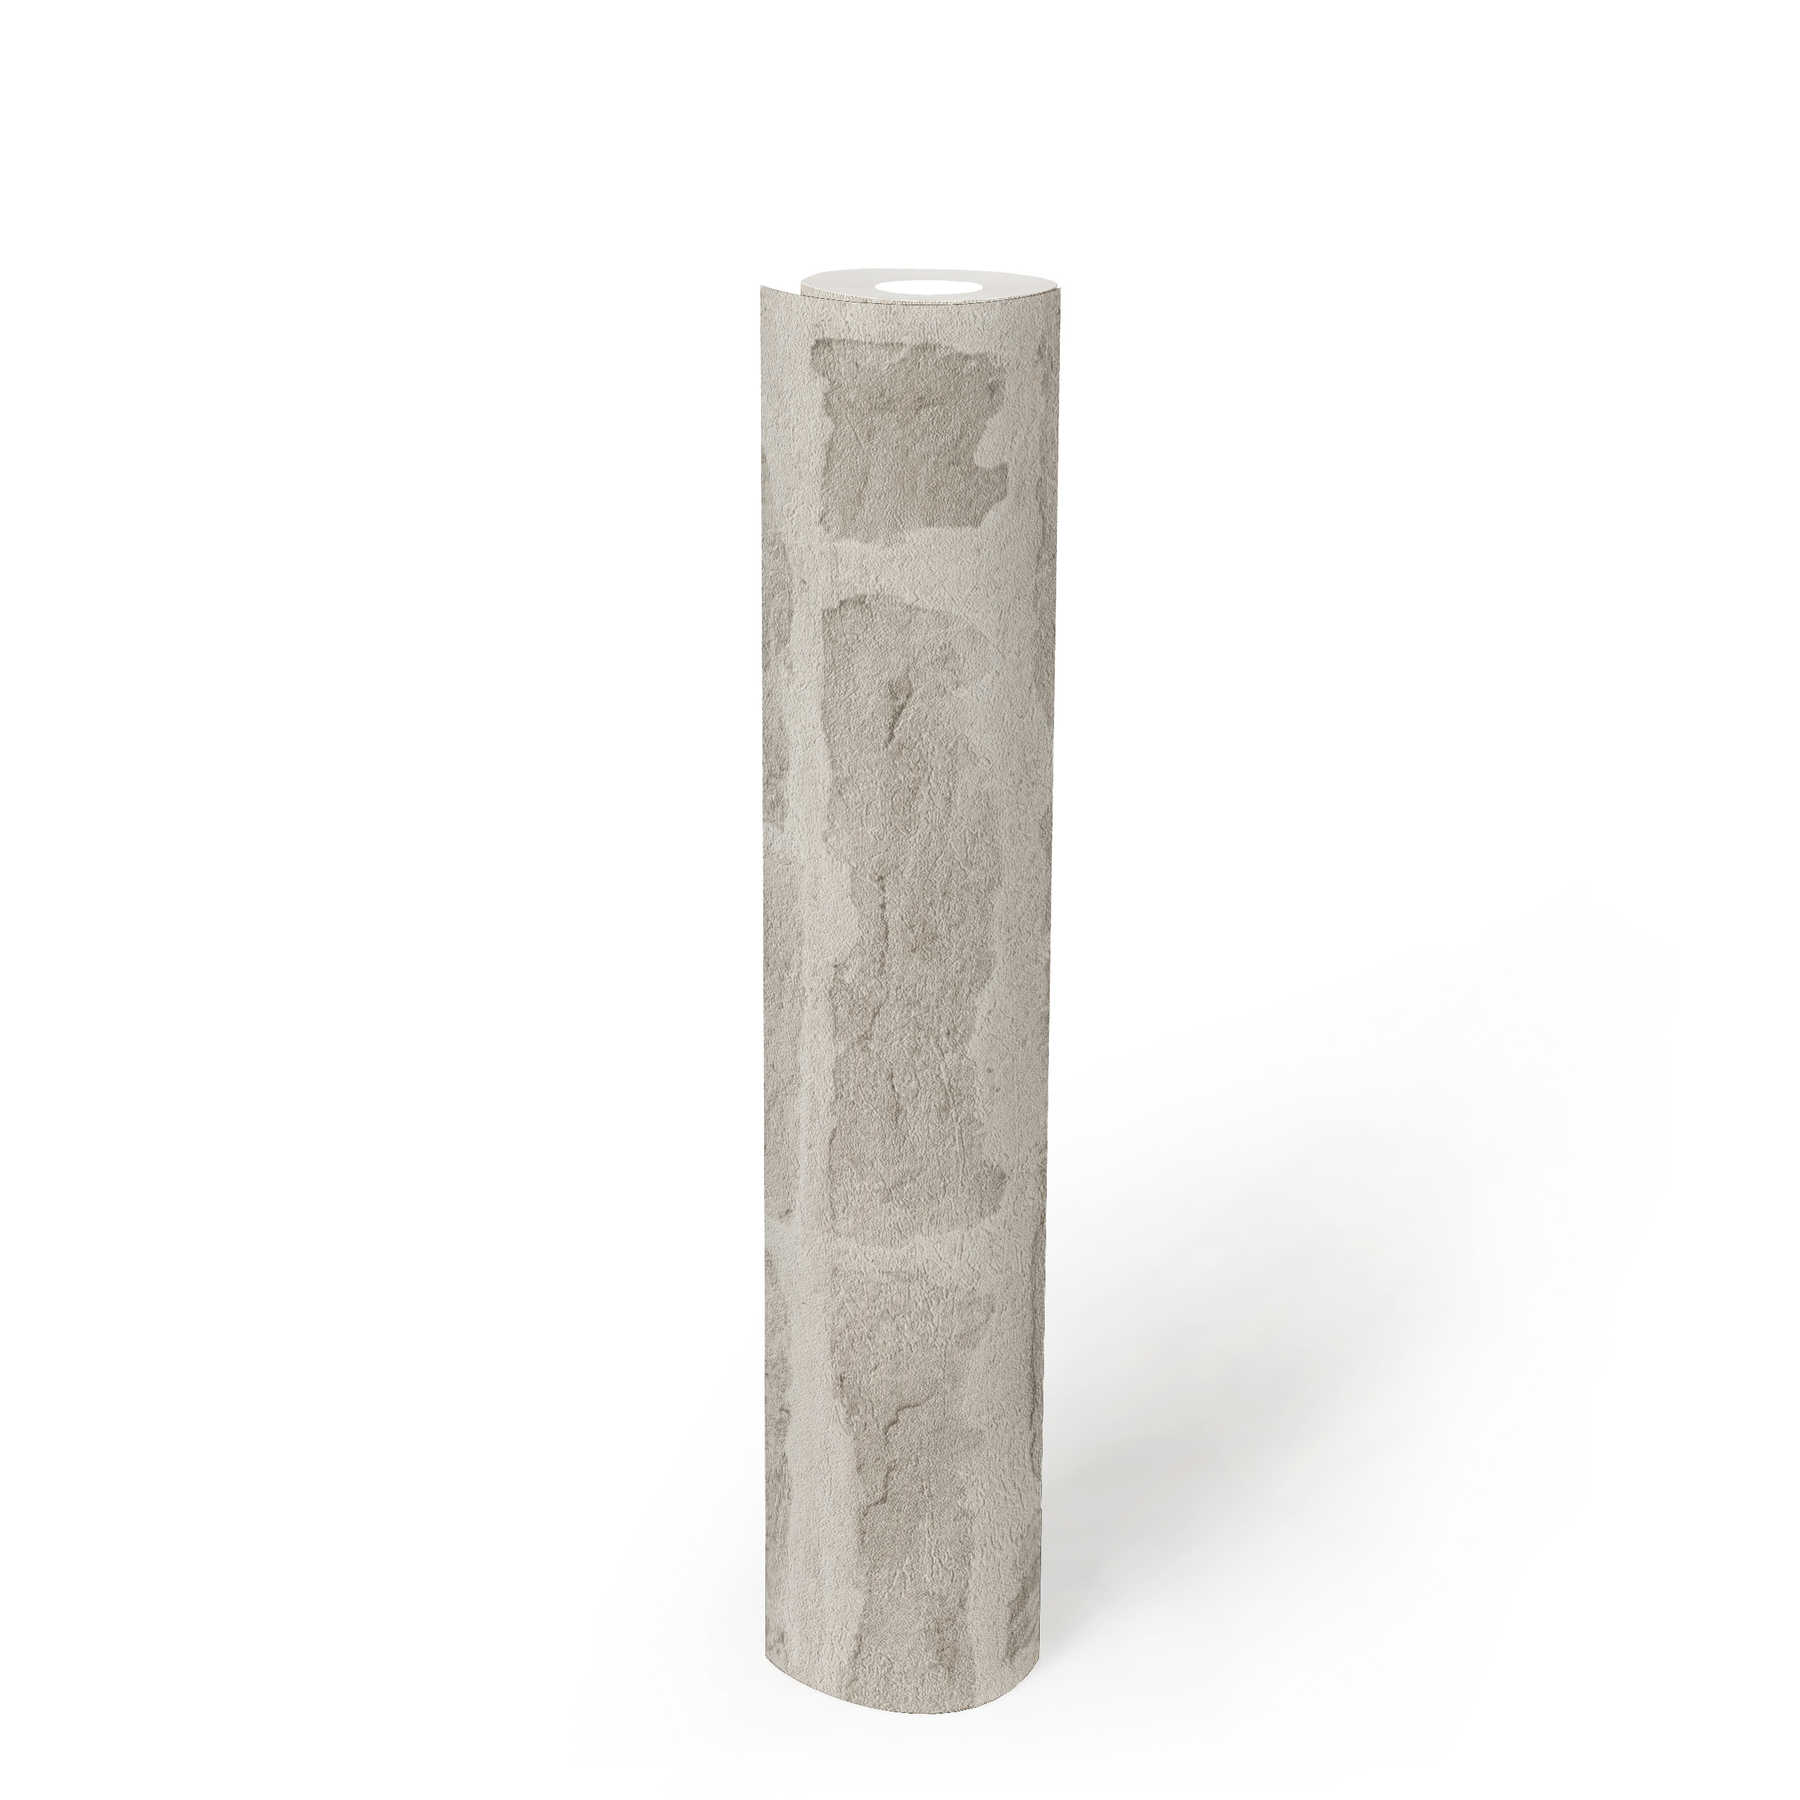             Wallpaper with grey natural stone pattern - grey
        